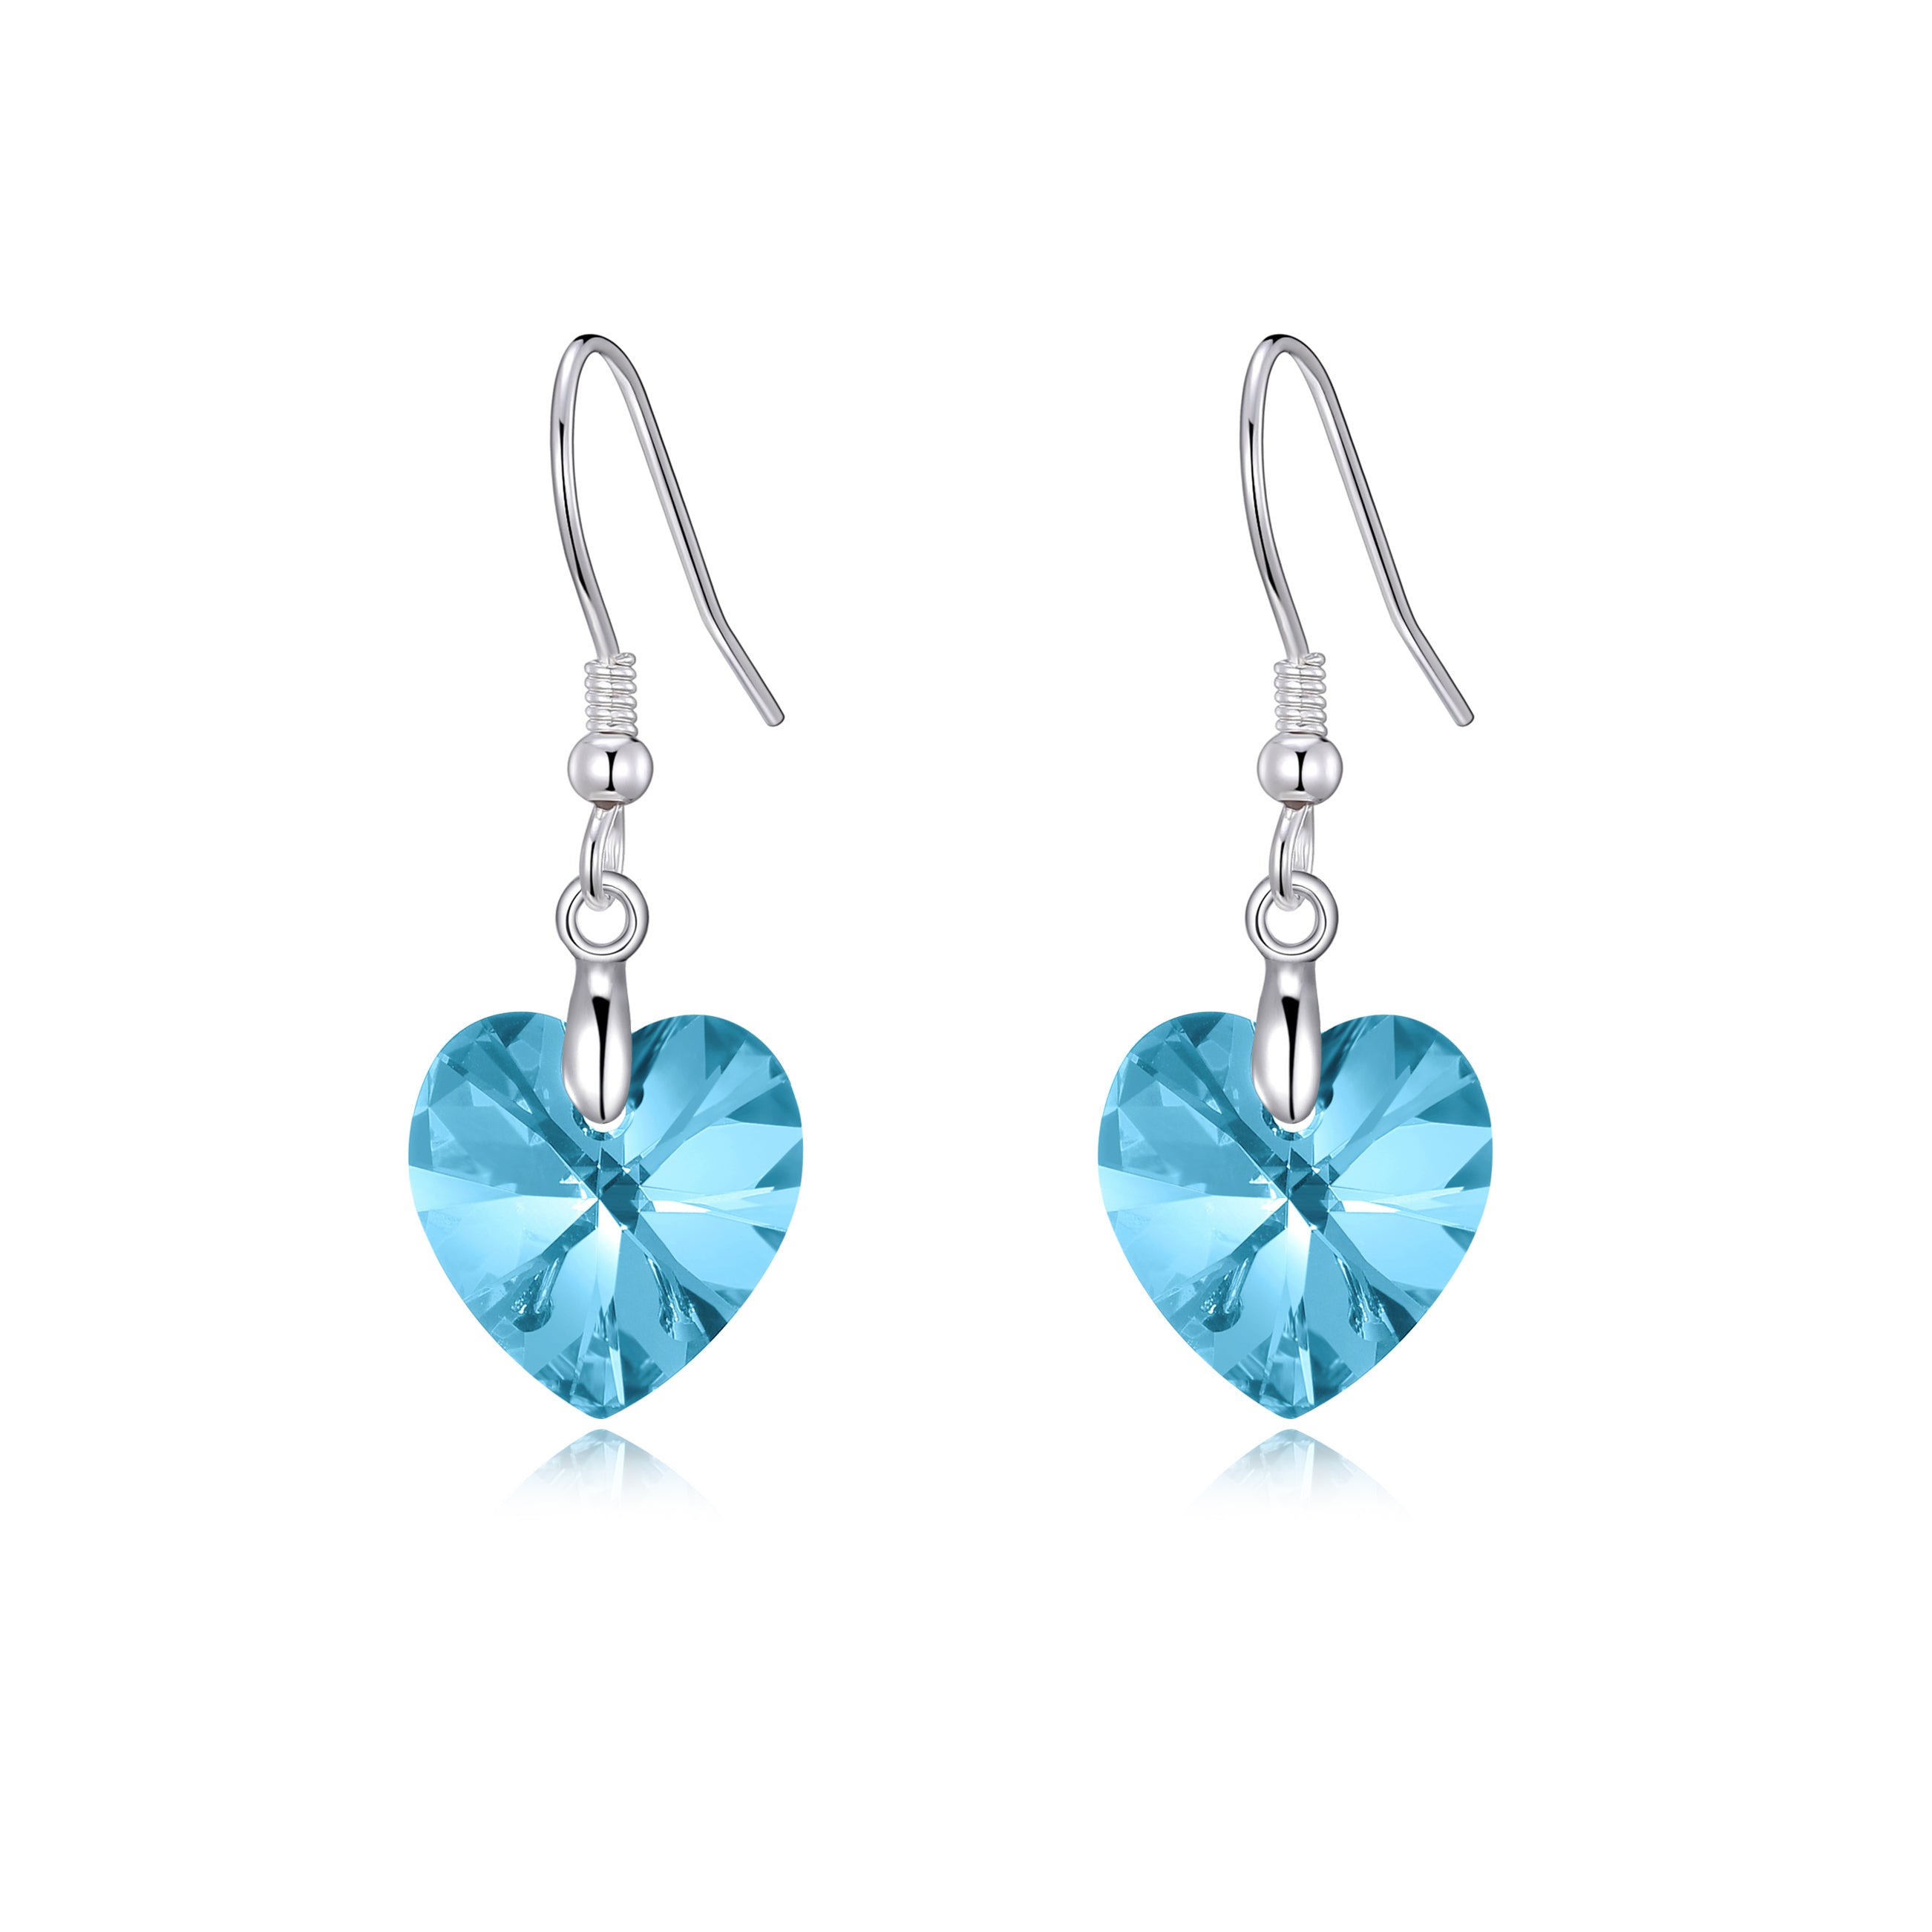 Sterling Silver Aquamarine Heart Earrings Created with Zircondia® Crystals by Philip Jones Jewellery